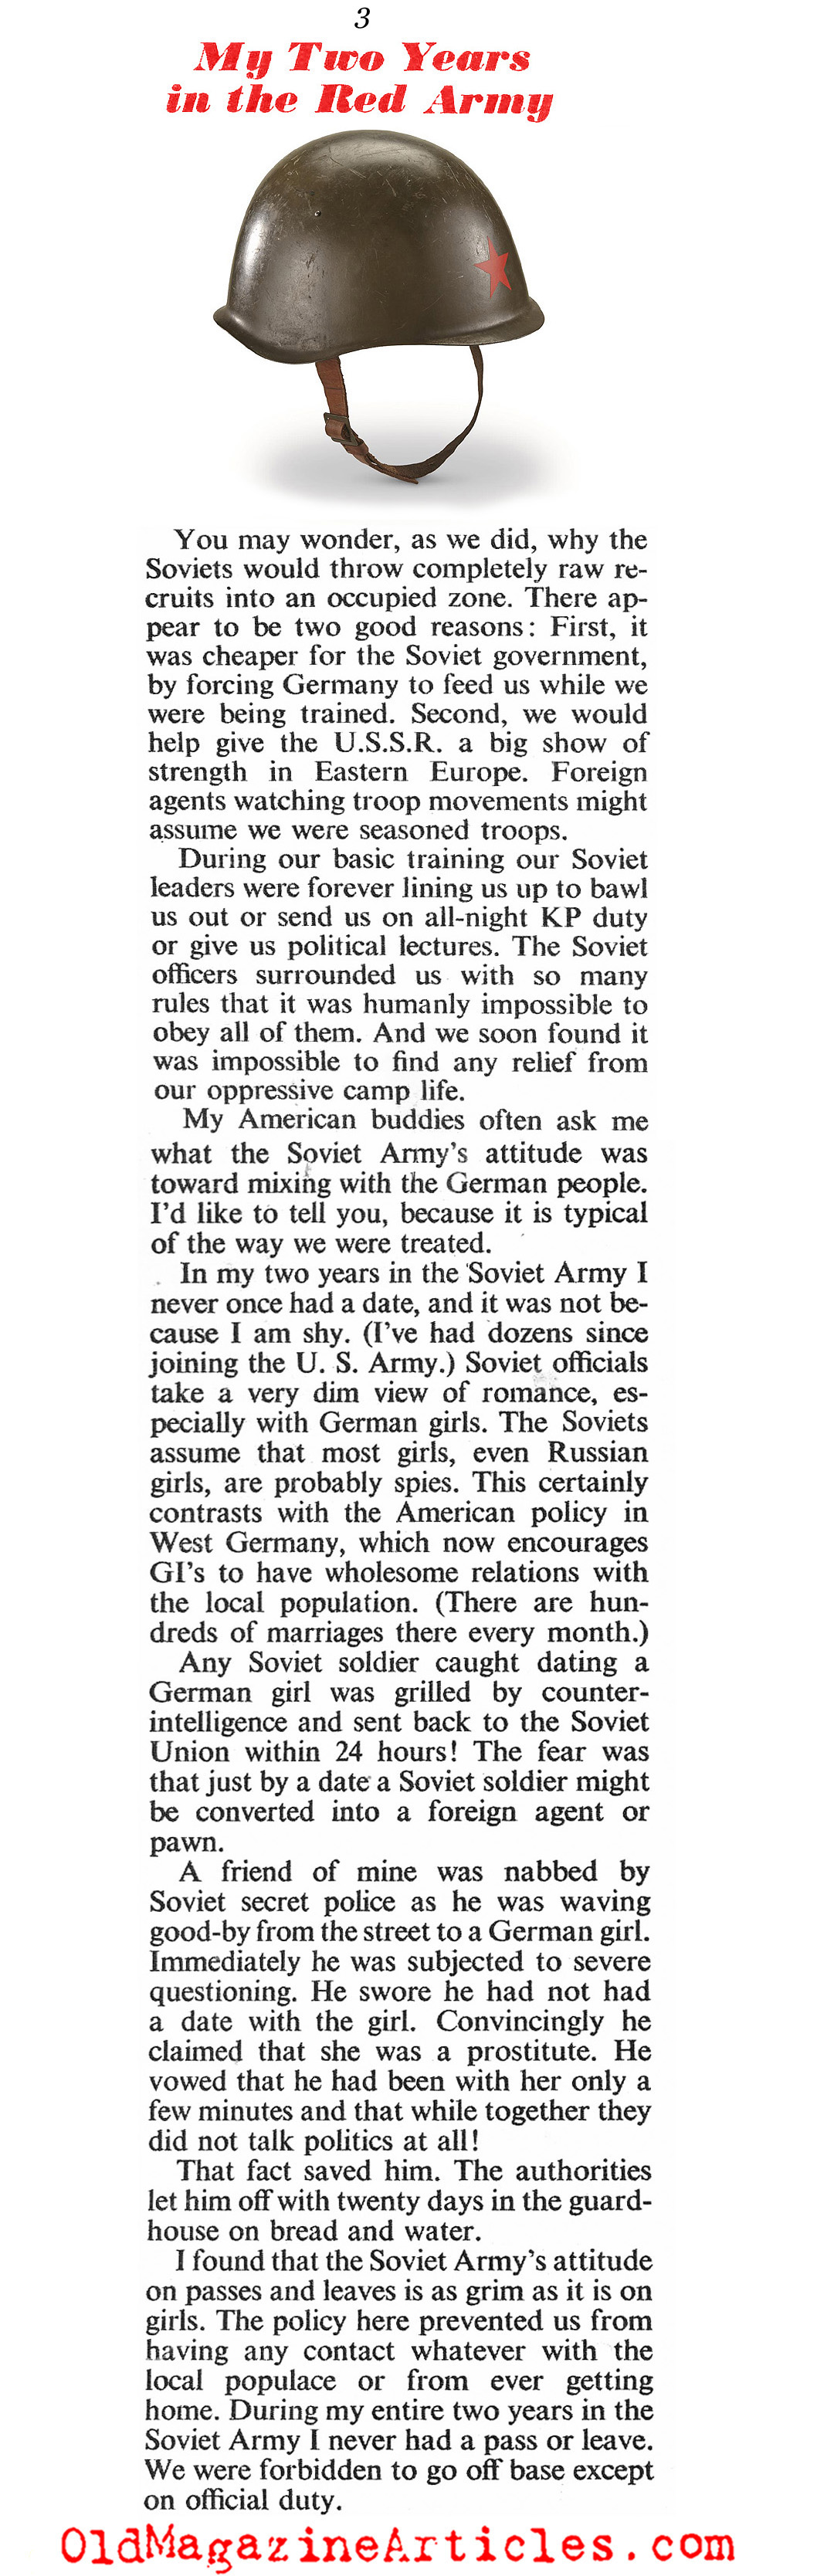 ''My Two Years In The Red Army'' (American Magazine, 1953)